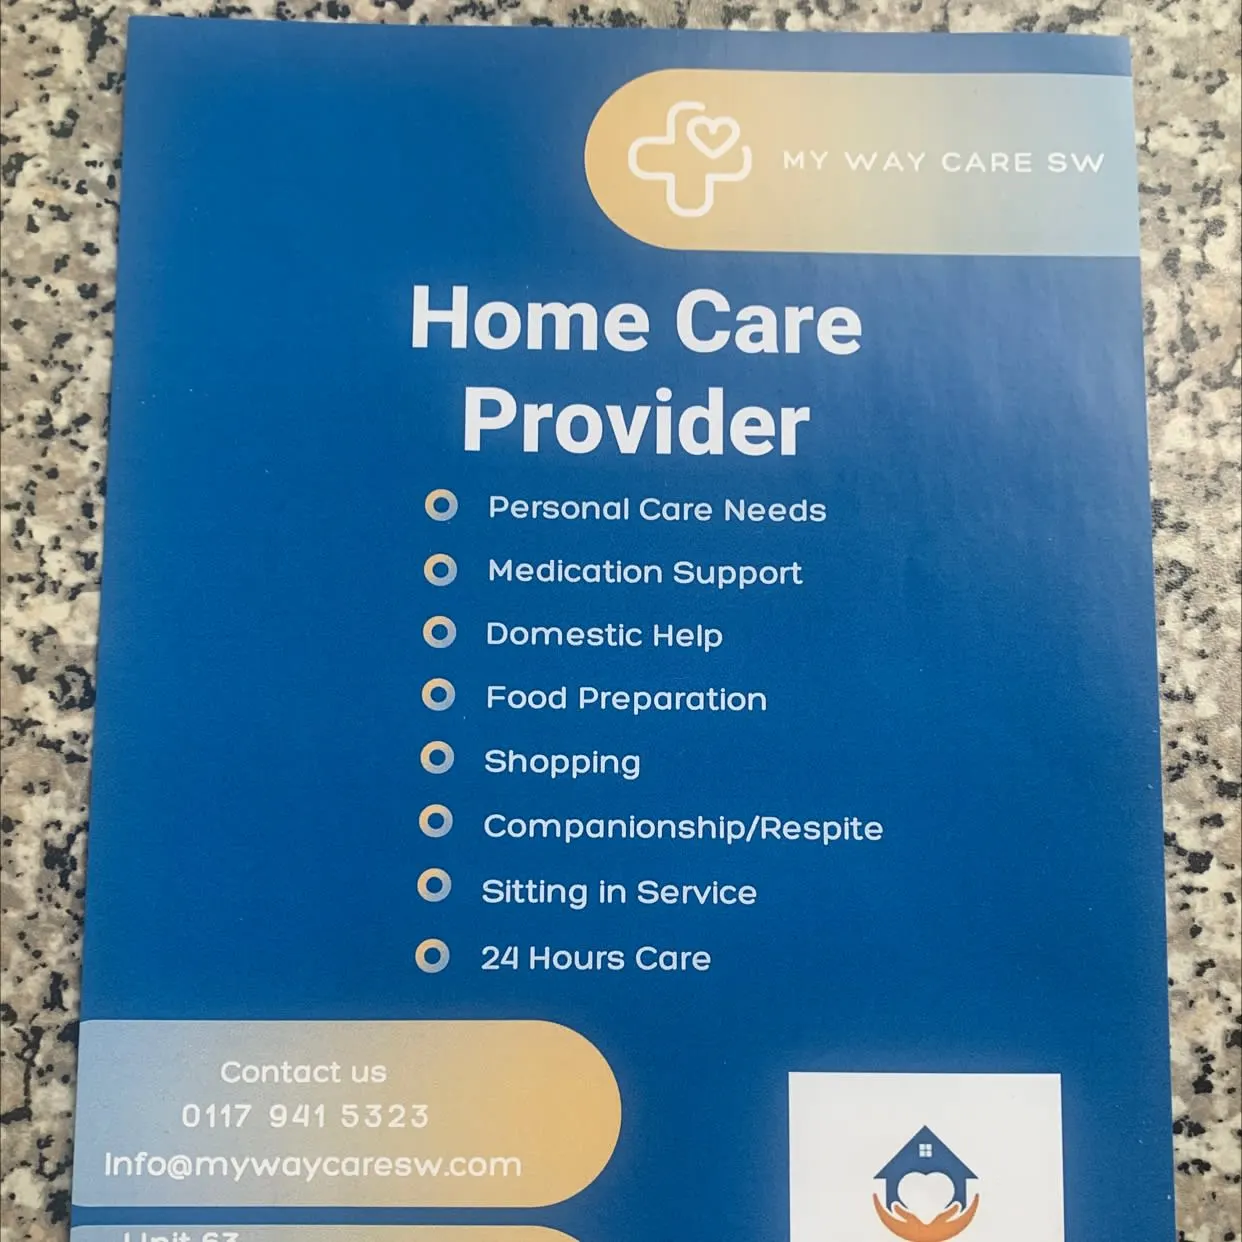 My Way Care South West Bristol 07700 177483